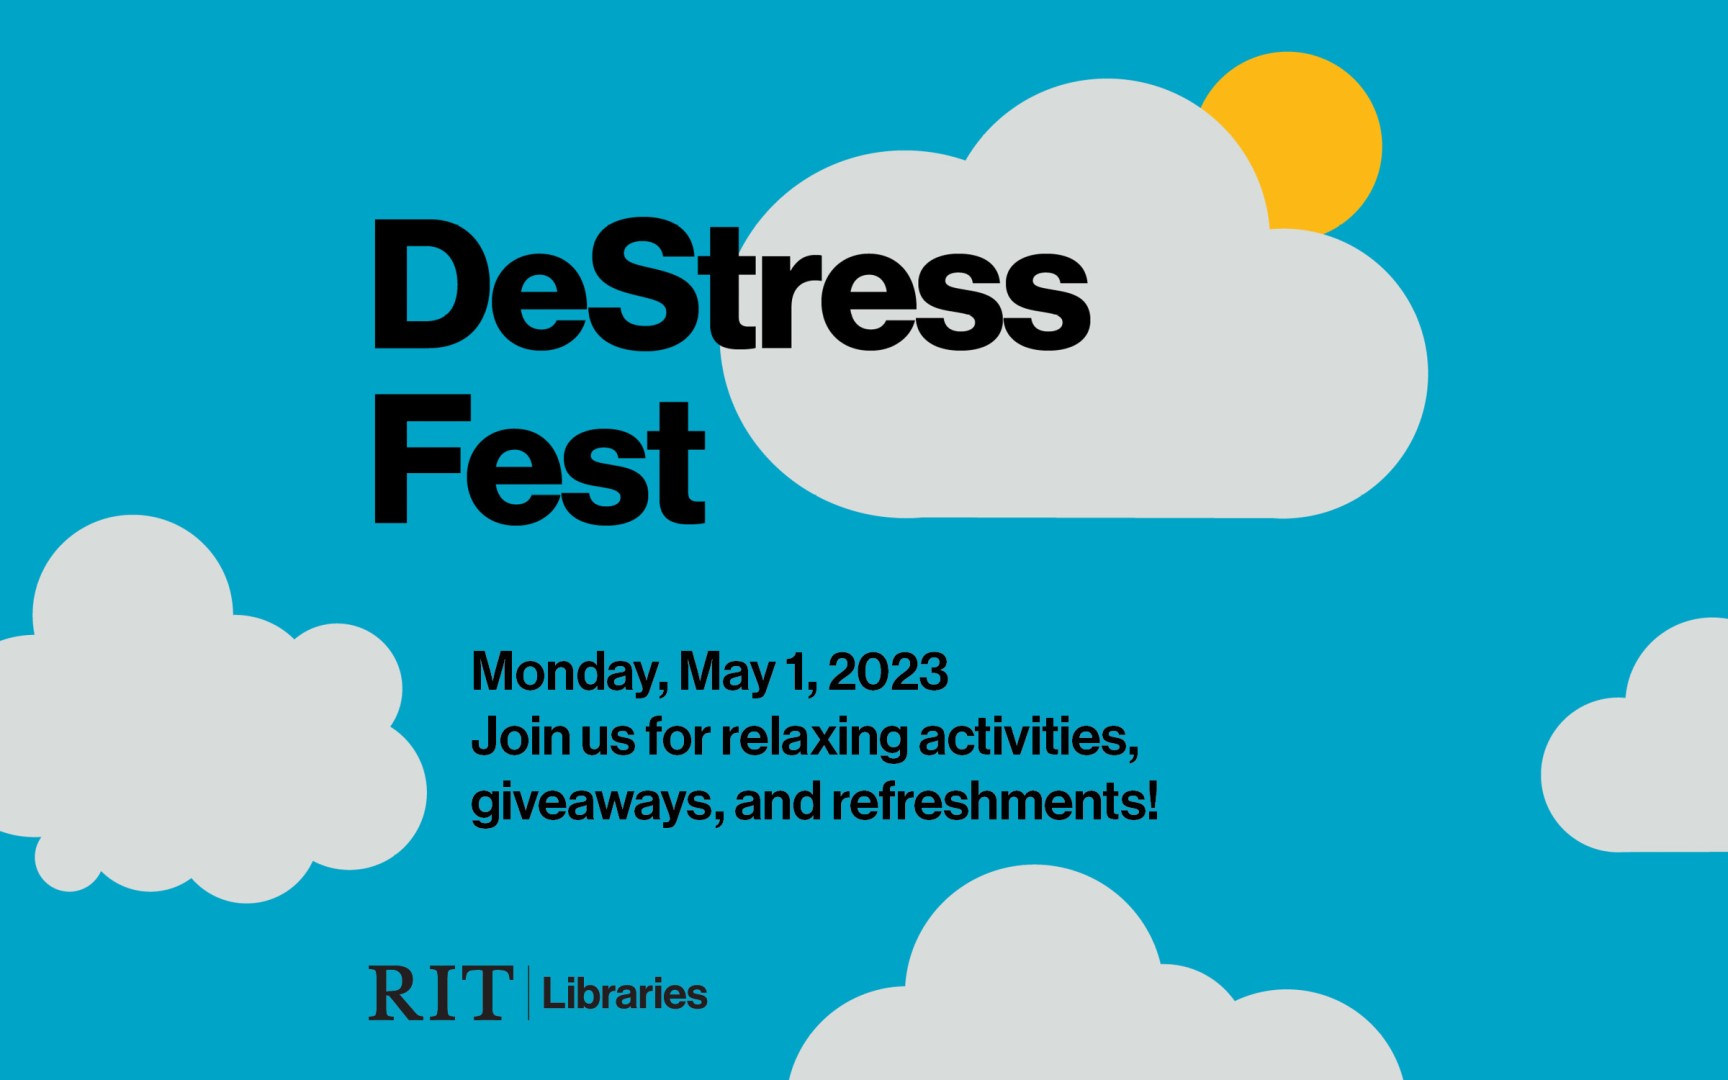 Destress Fest will be held on Monday, May 1, 2023 from 10AM to 12PM in our Wallace on Ice location in RItter Arena